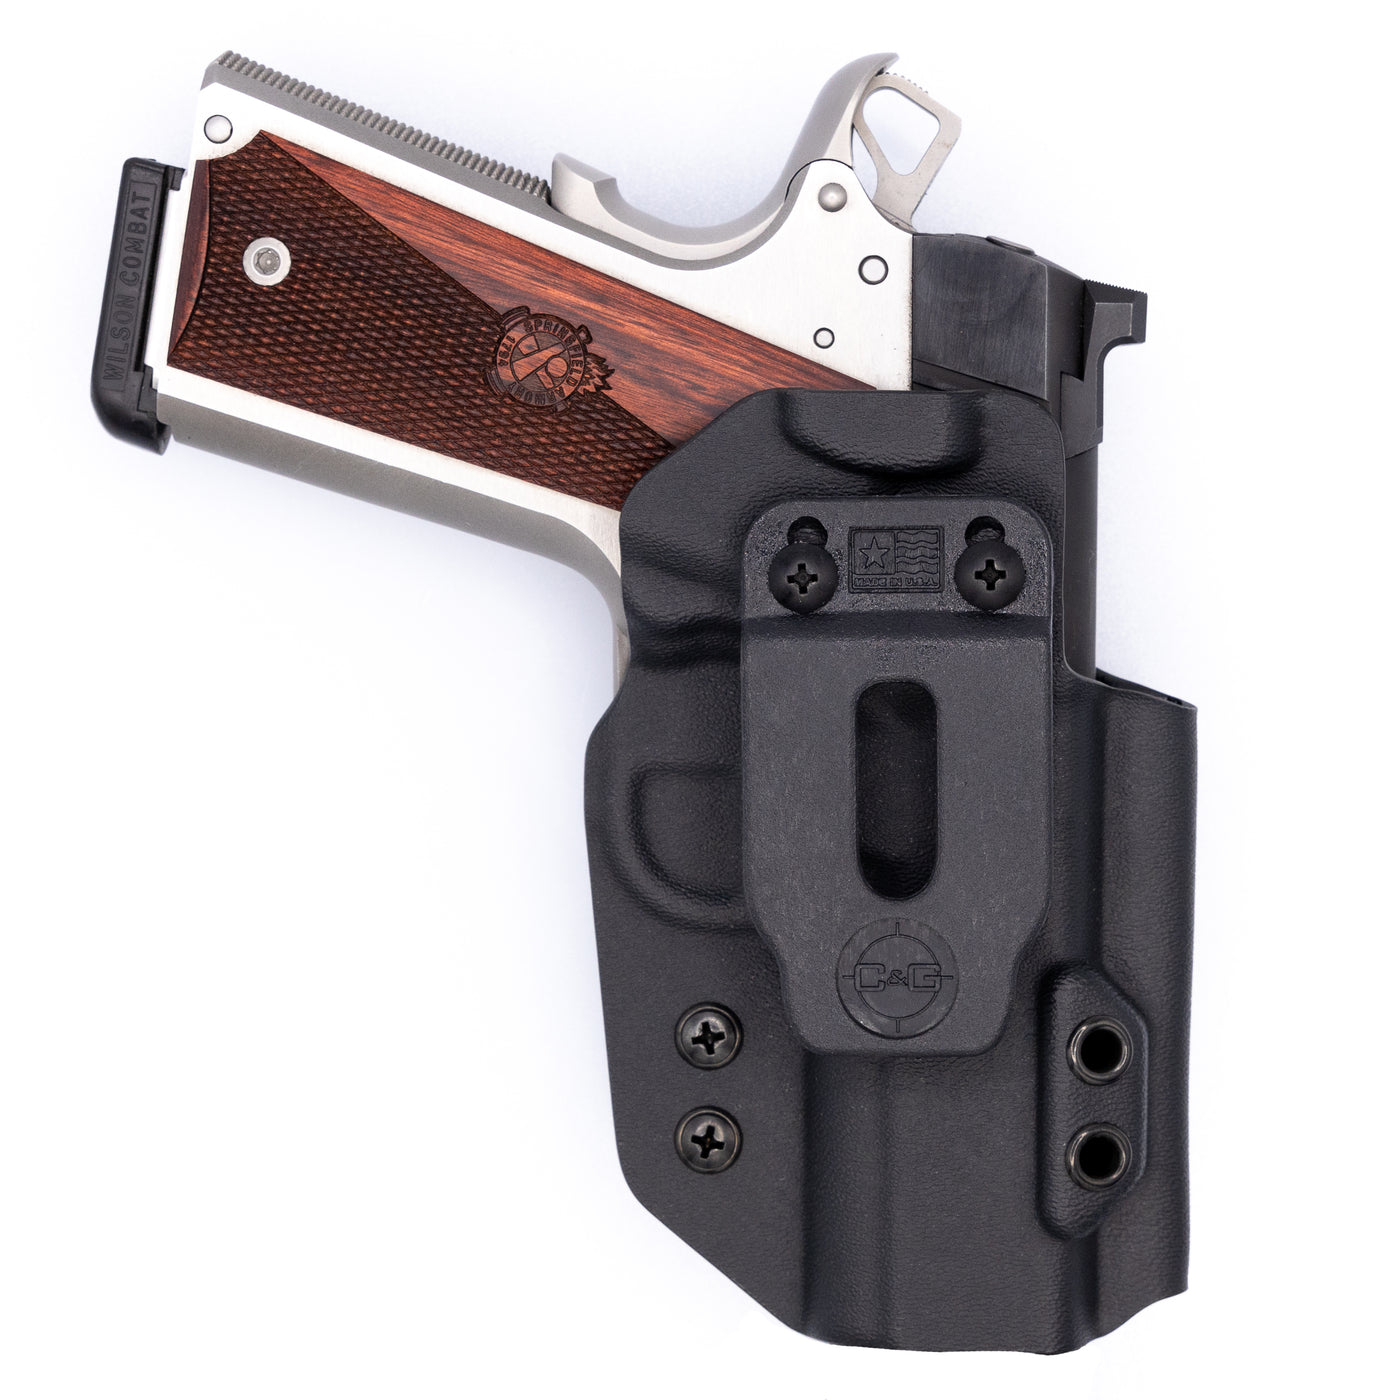 1911 3.5" IWB Covert Kydex Holster from the rear showing the branded belt clip with the firearm in the holstered position